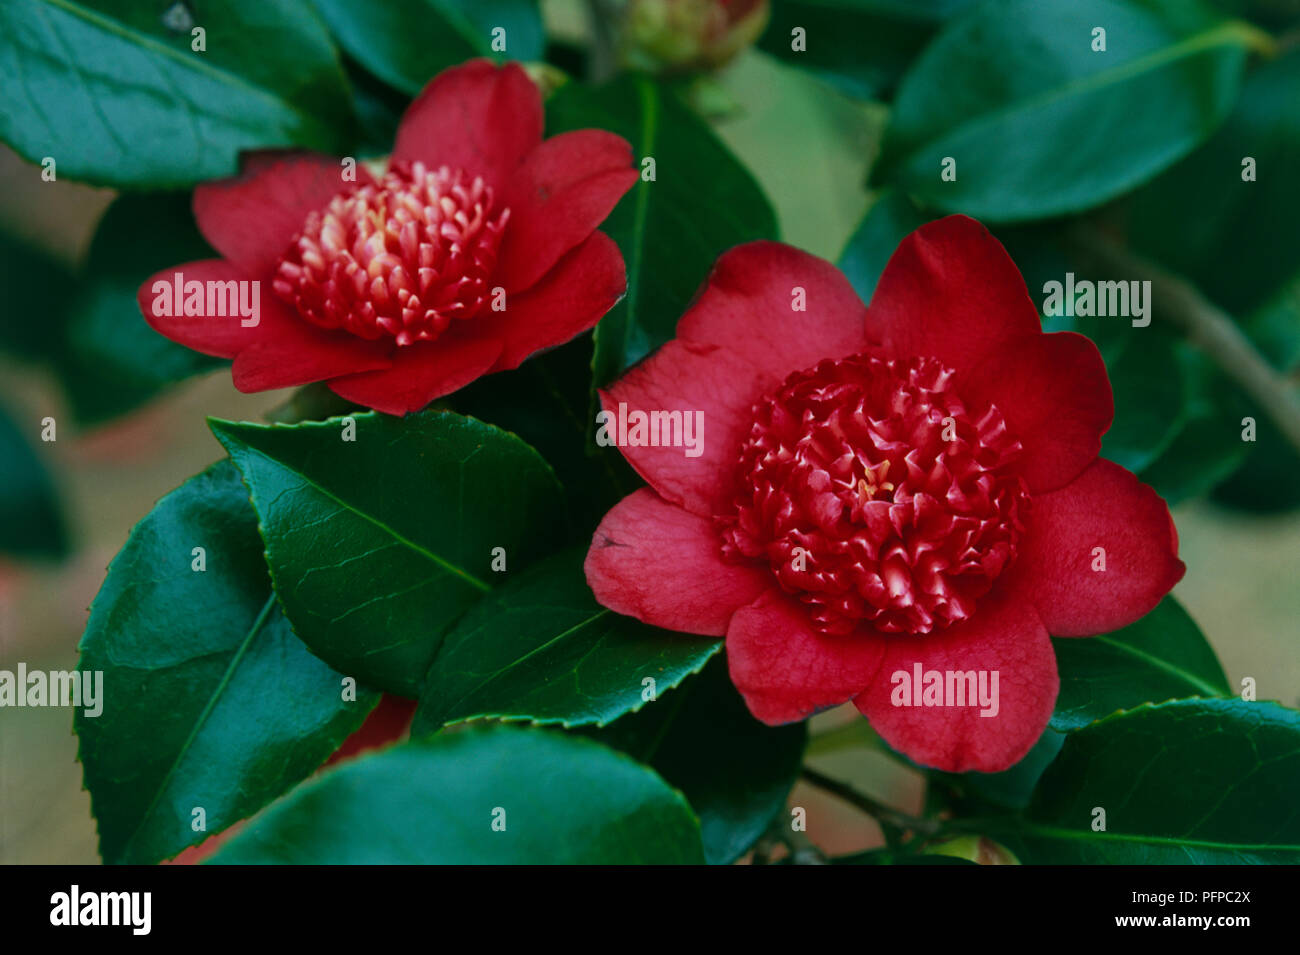 Camellia japonica 'Bob's Tinsie' (Japanese camellia), red flowers and evergreen leaves, close-up Stock Photo